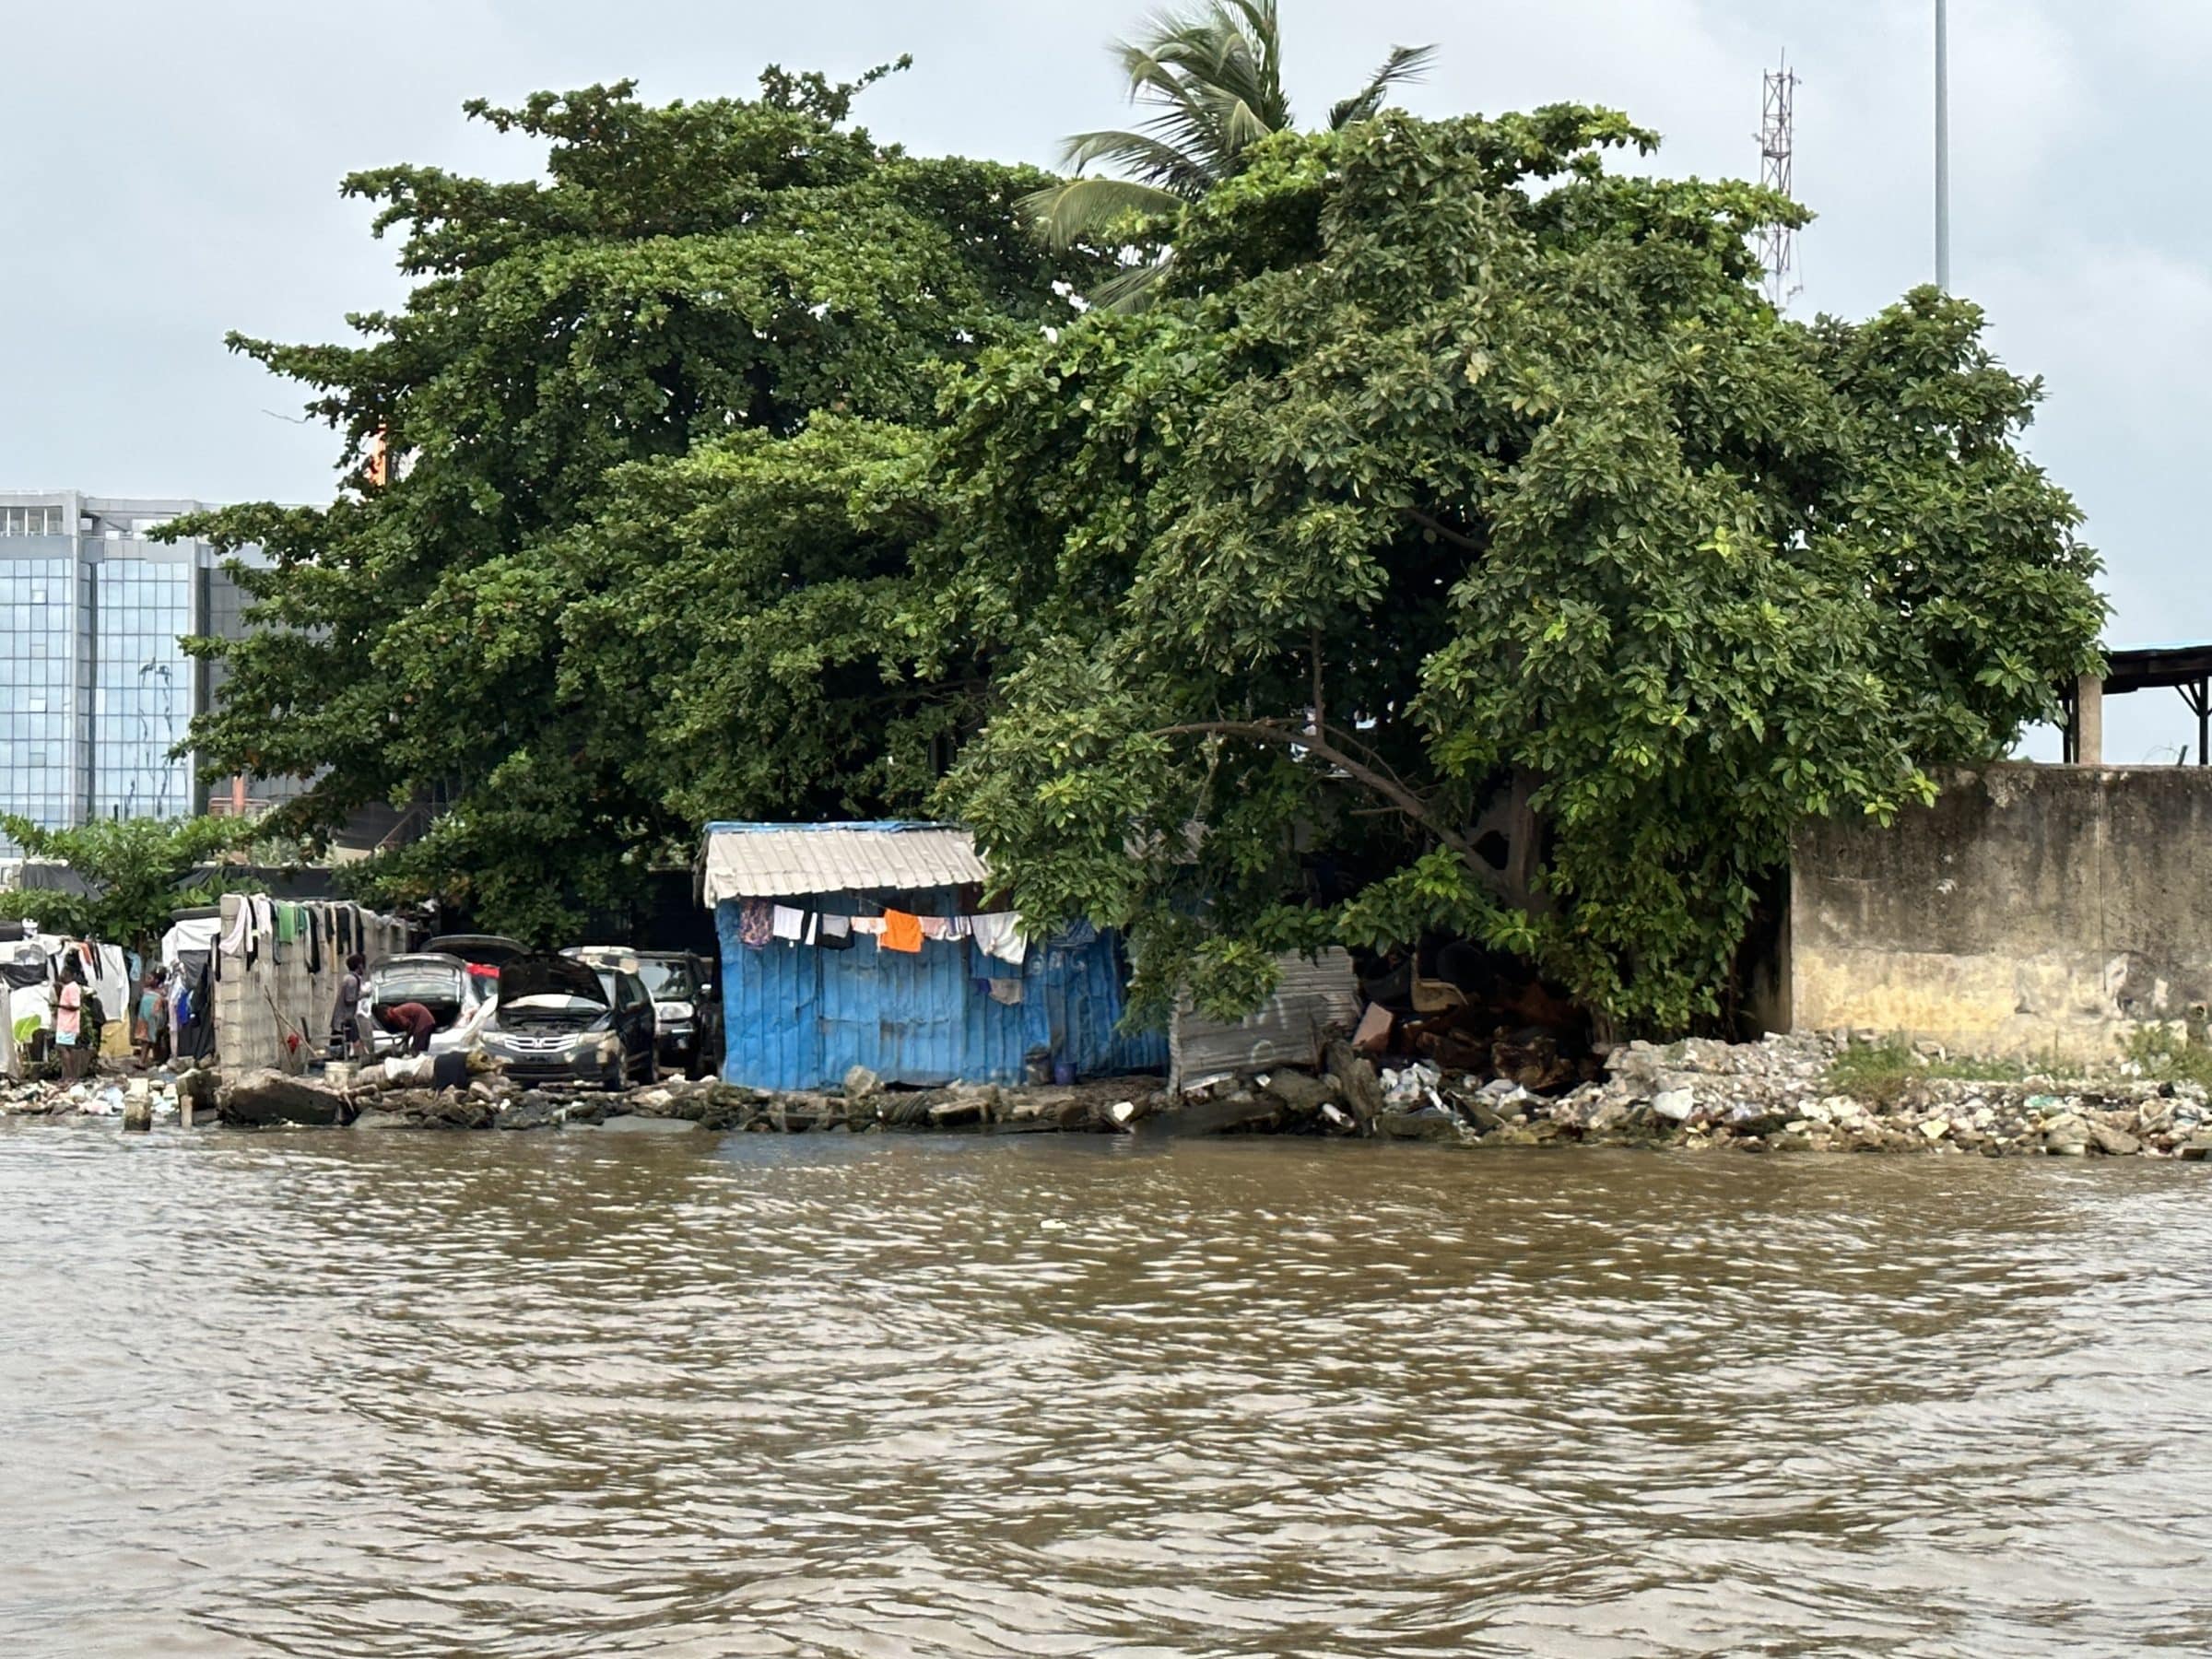 Accommodation along the water | Overlanding in Nigeria